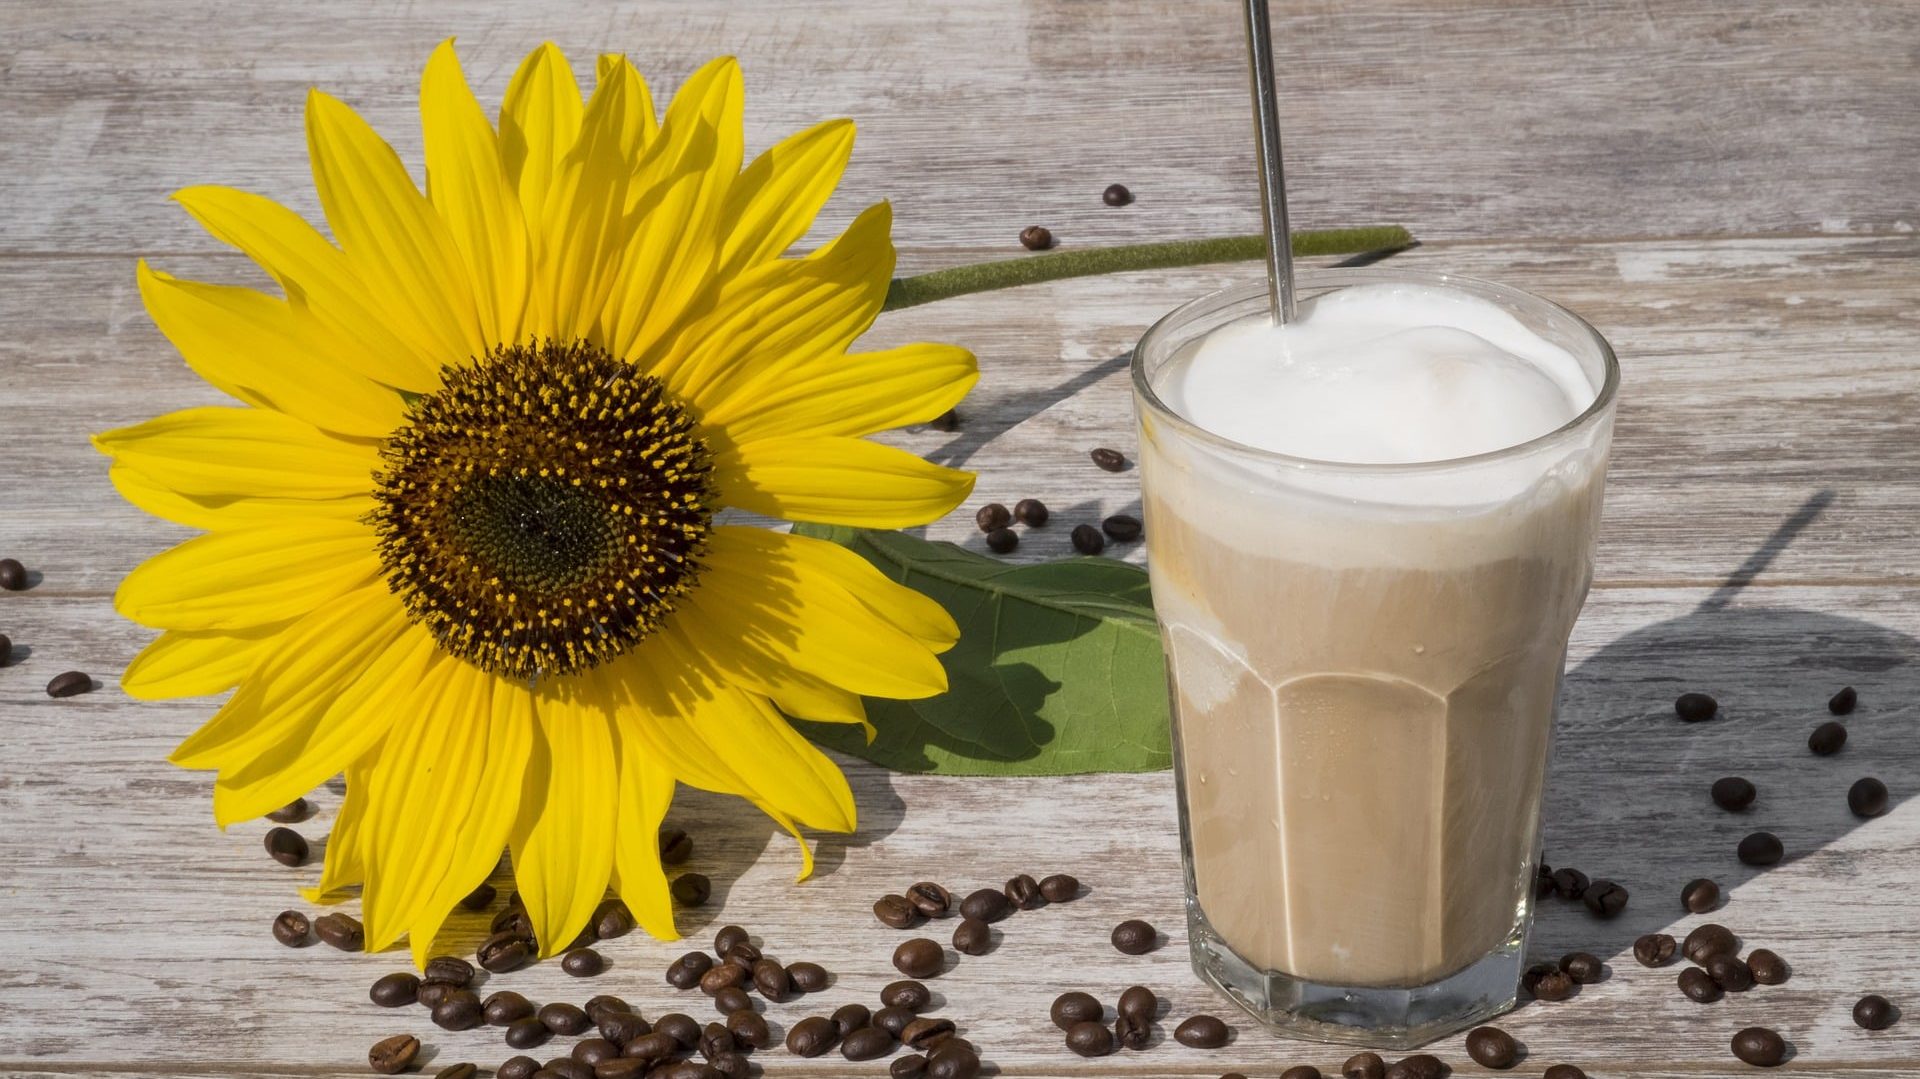 Iced coffee next to a sunflower